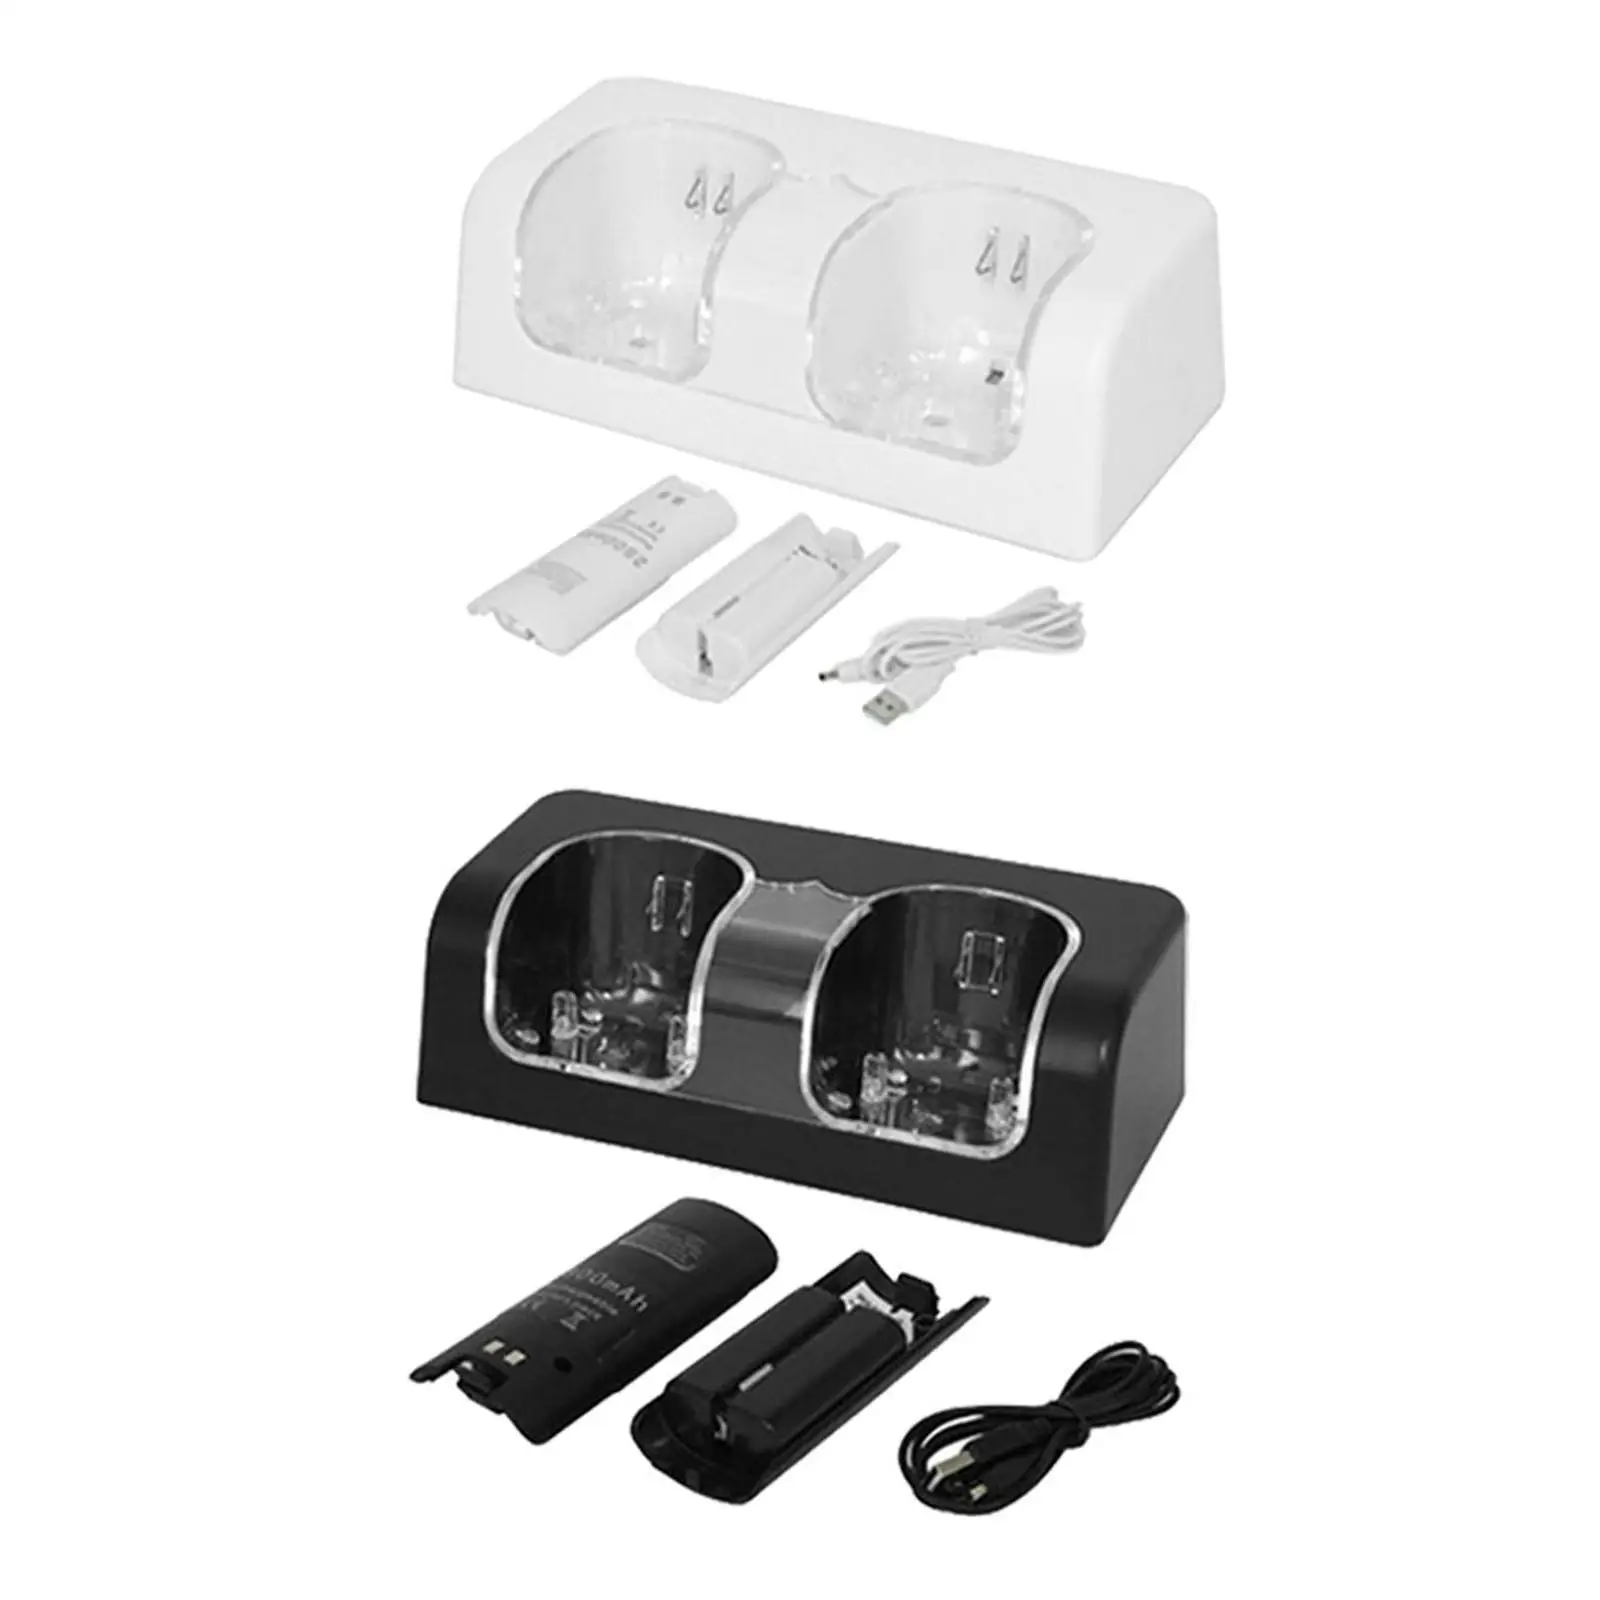 2 in 1 Smart Charger Charging Dock Station with Lengthened Cord for Wii Game Console Game Accessories